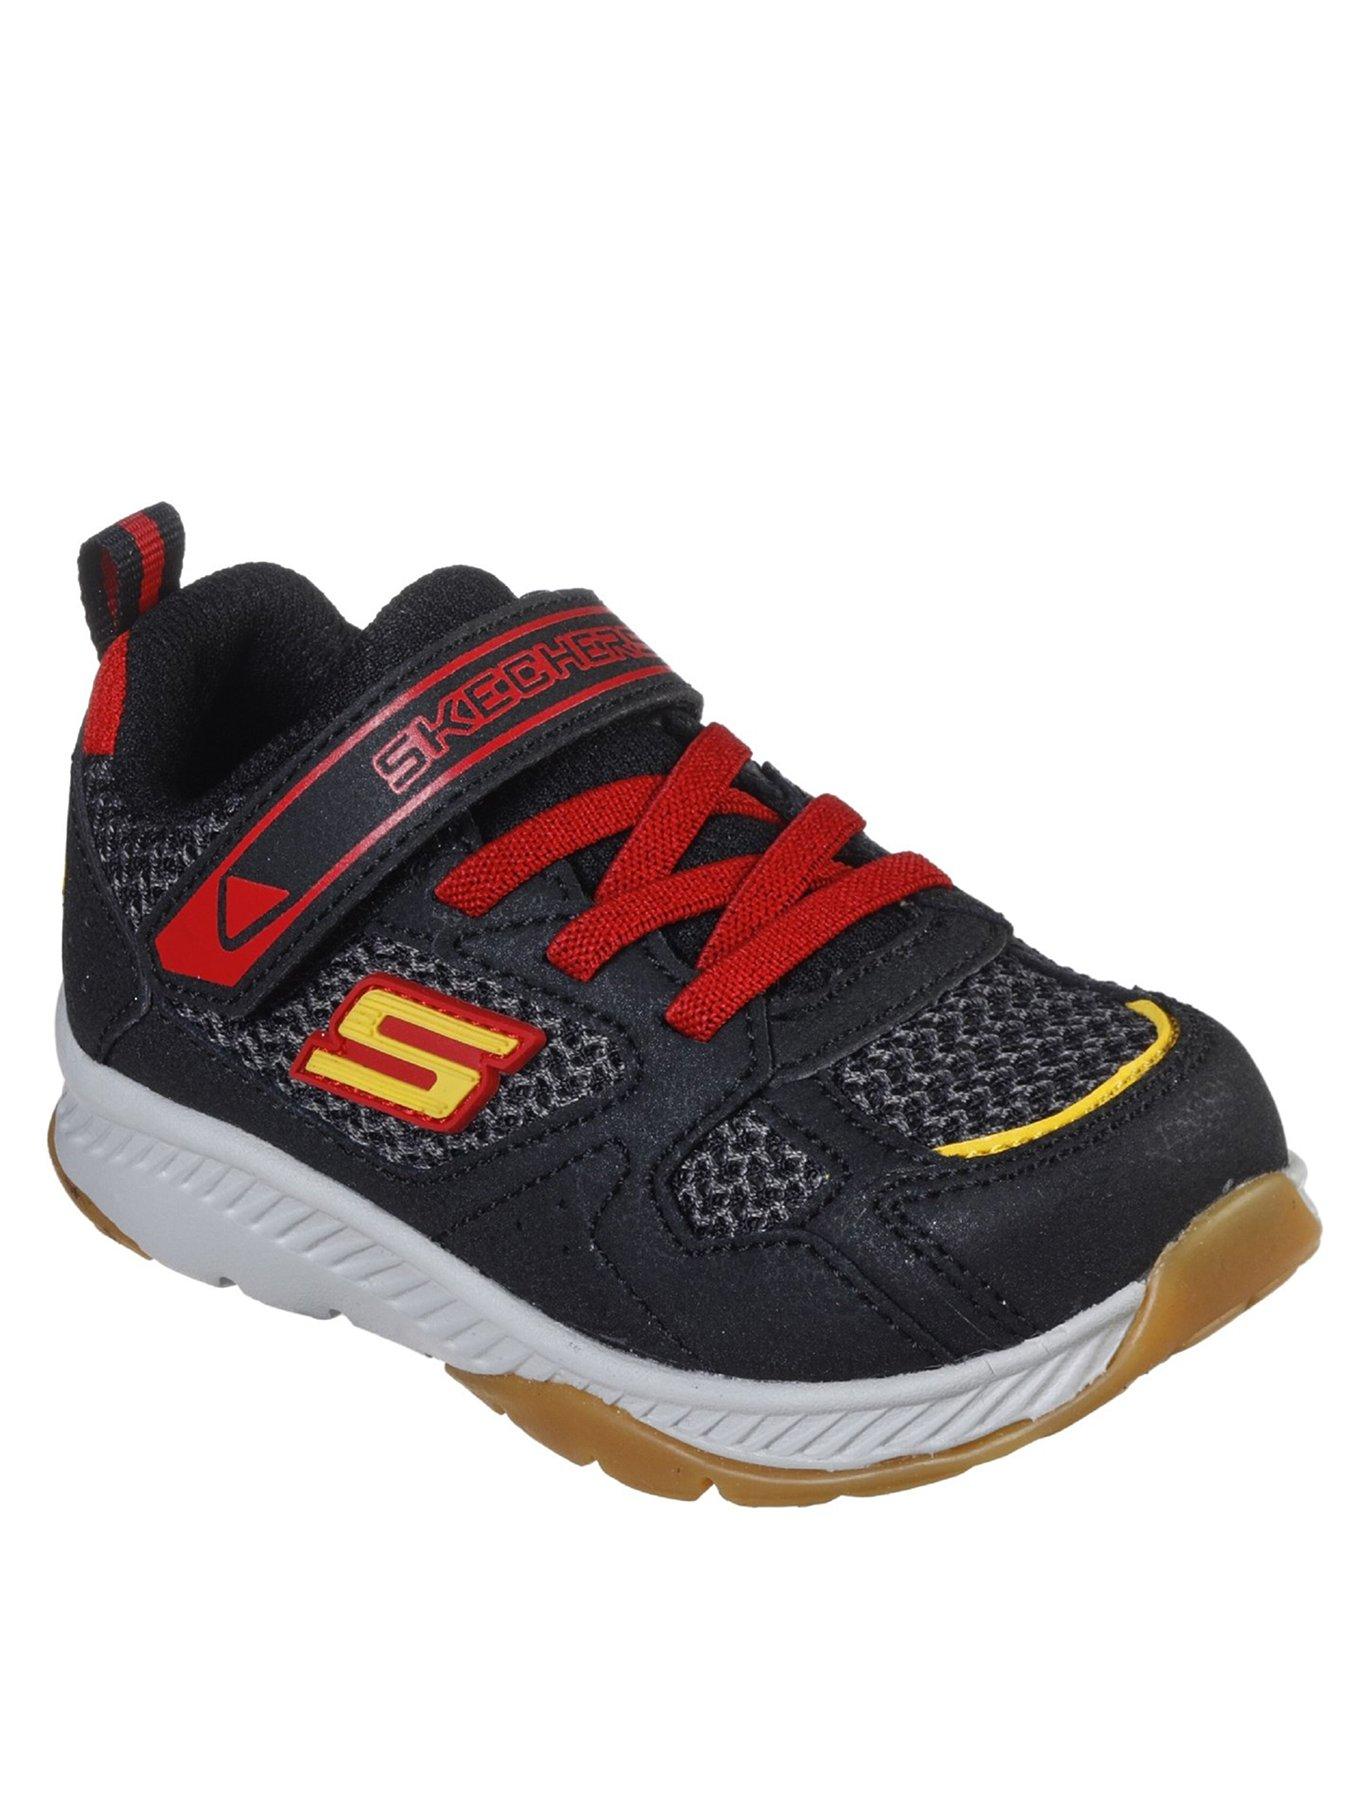 skechers red trainers